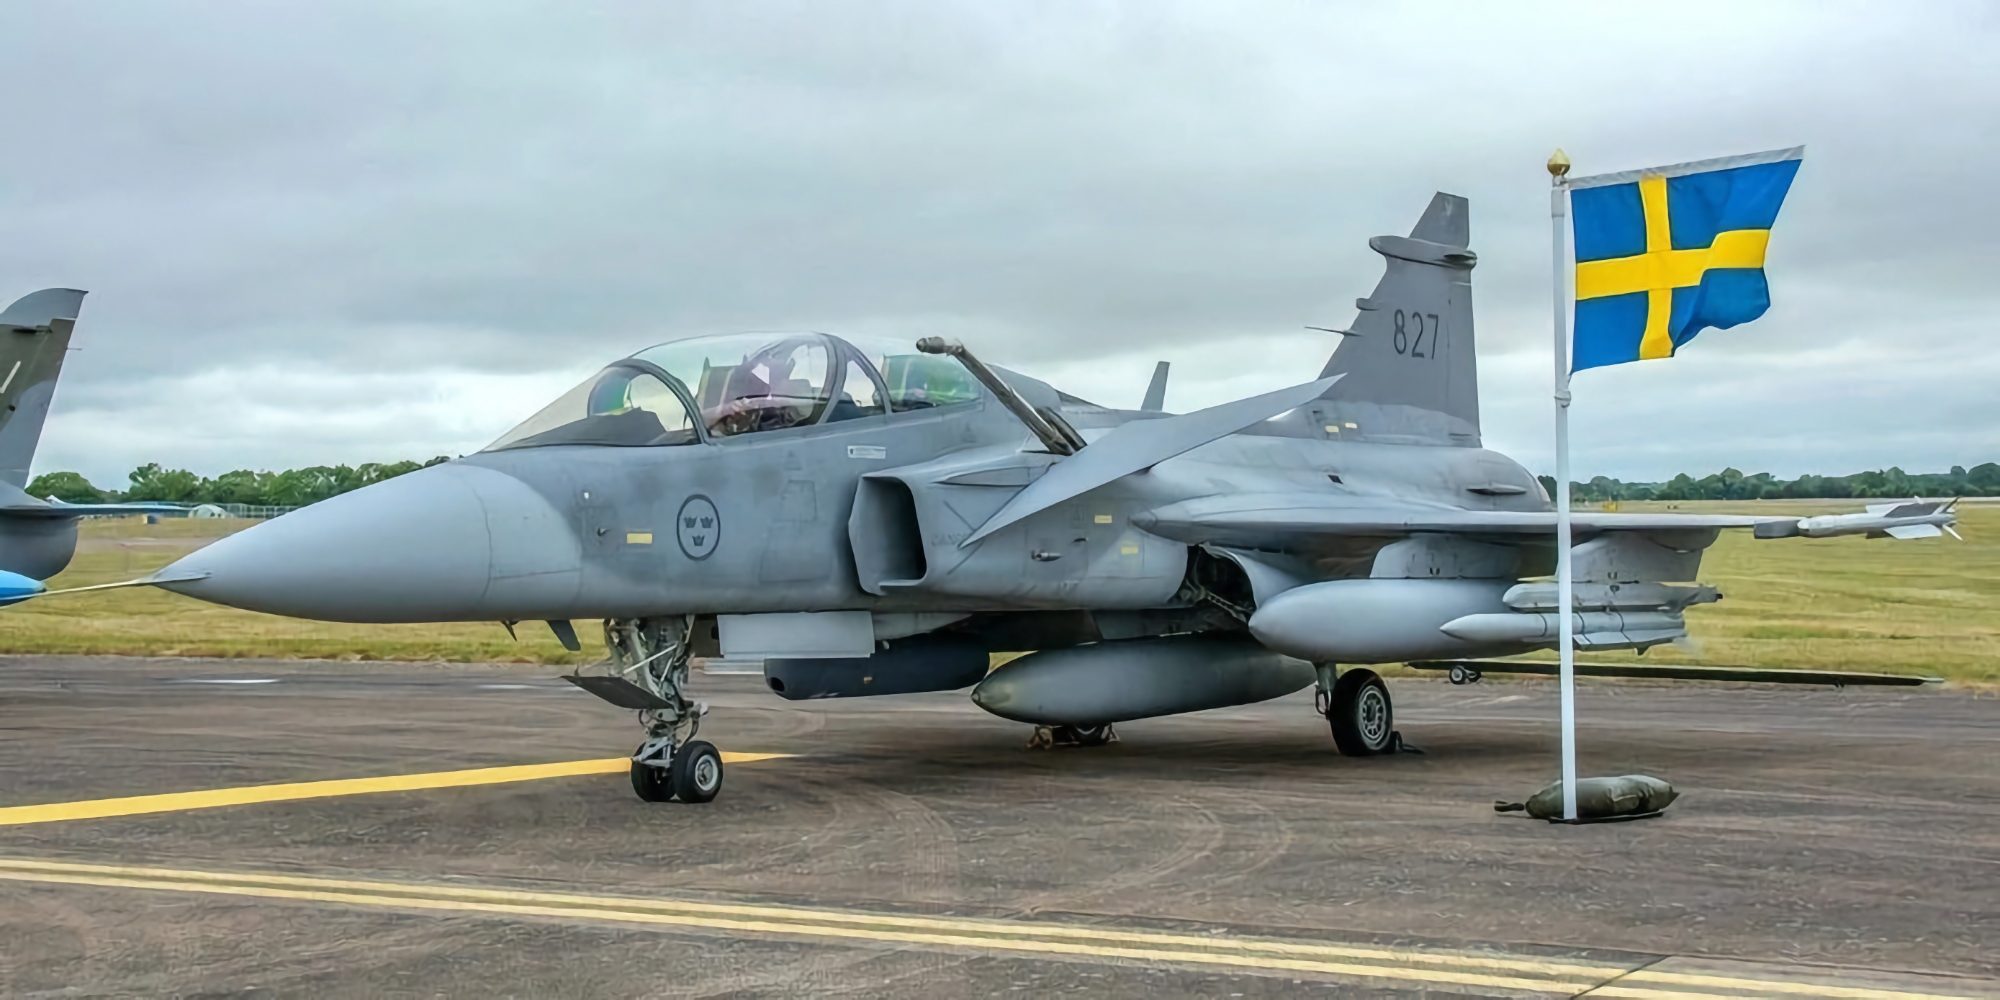 Sweden may soon approve deliveries of Saab JAS 39 Gripen fourth-generation fighters to Ukraine